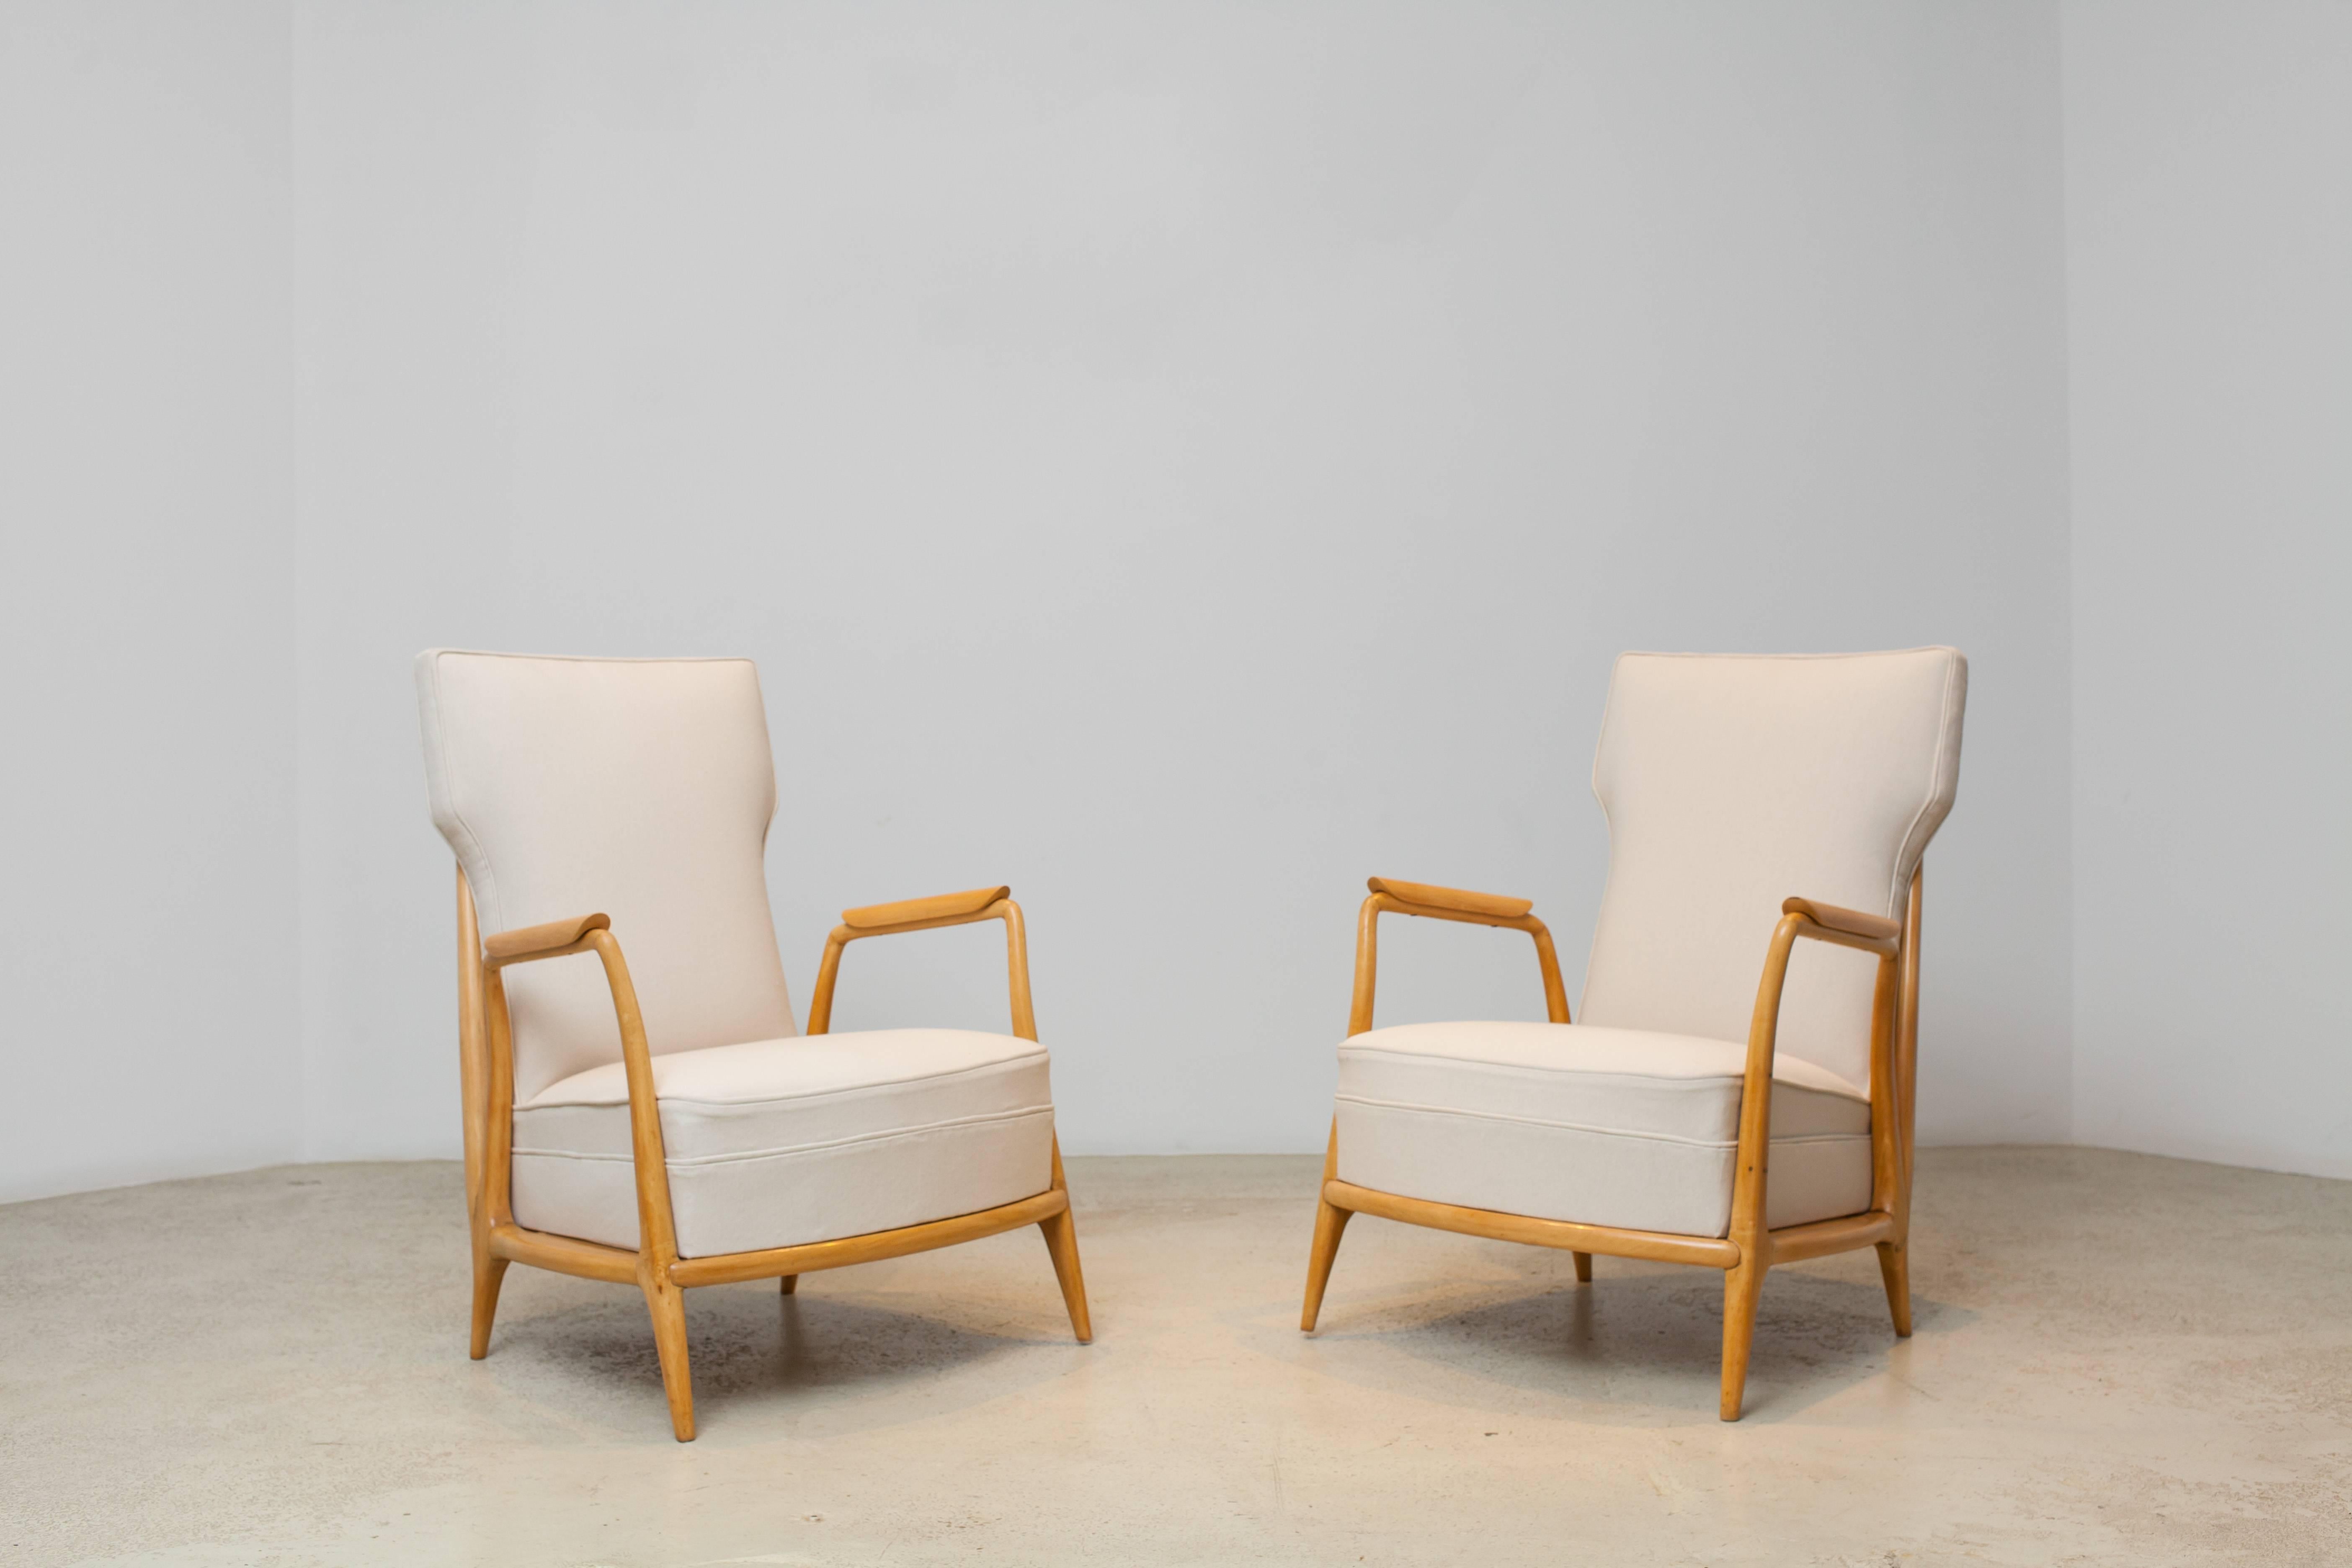 A rare pair of vintage low armchairs in solid Caviúna wood by Giuseppe Scappinelli.